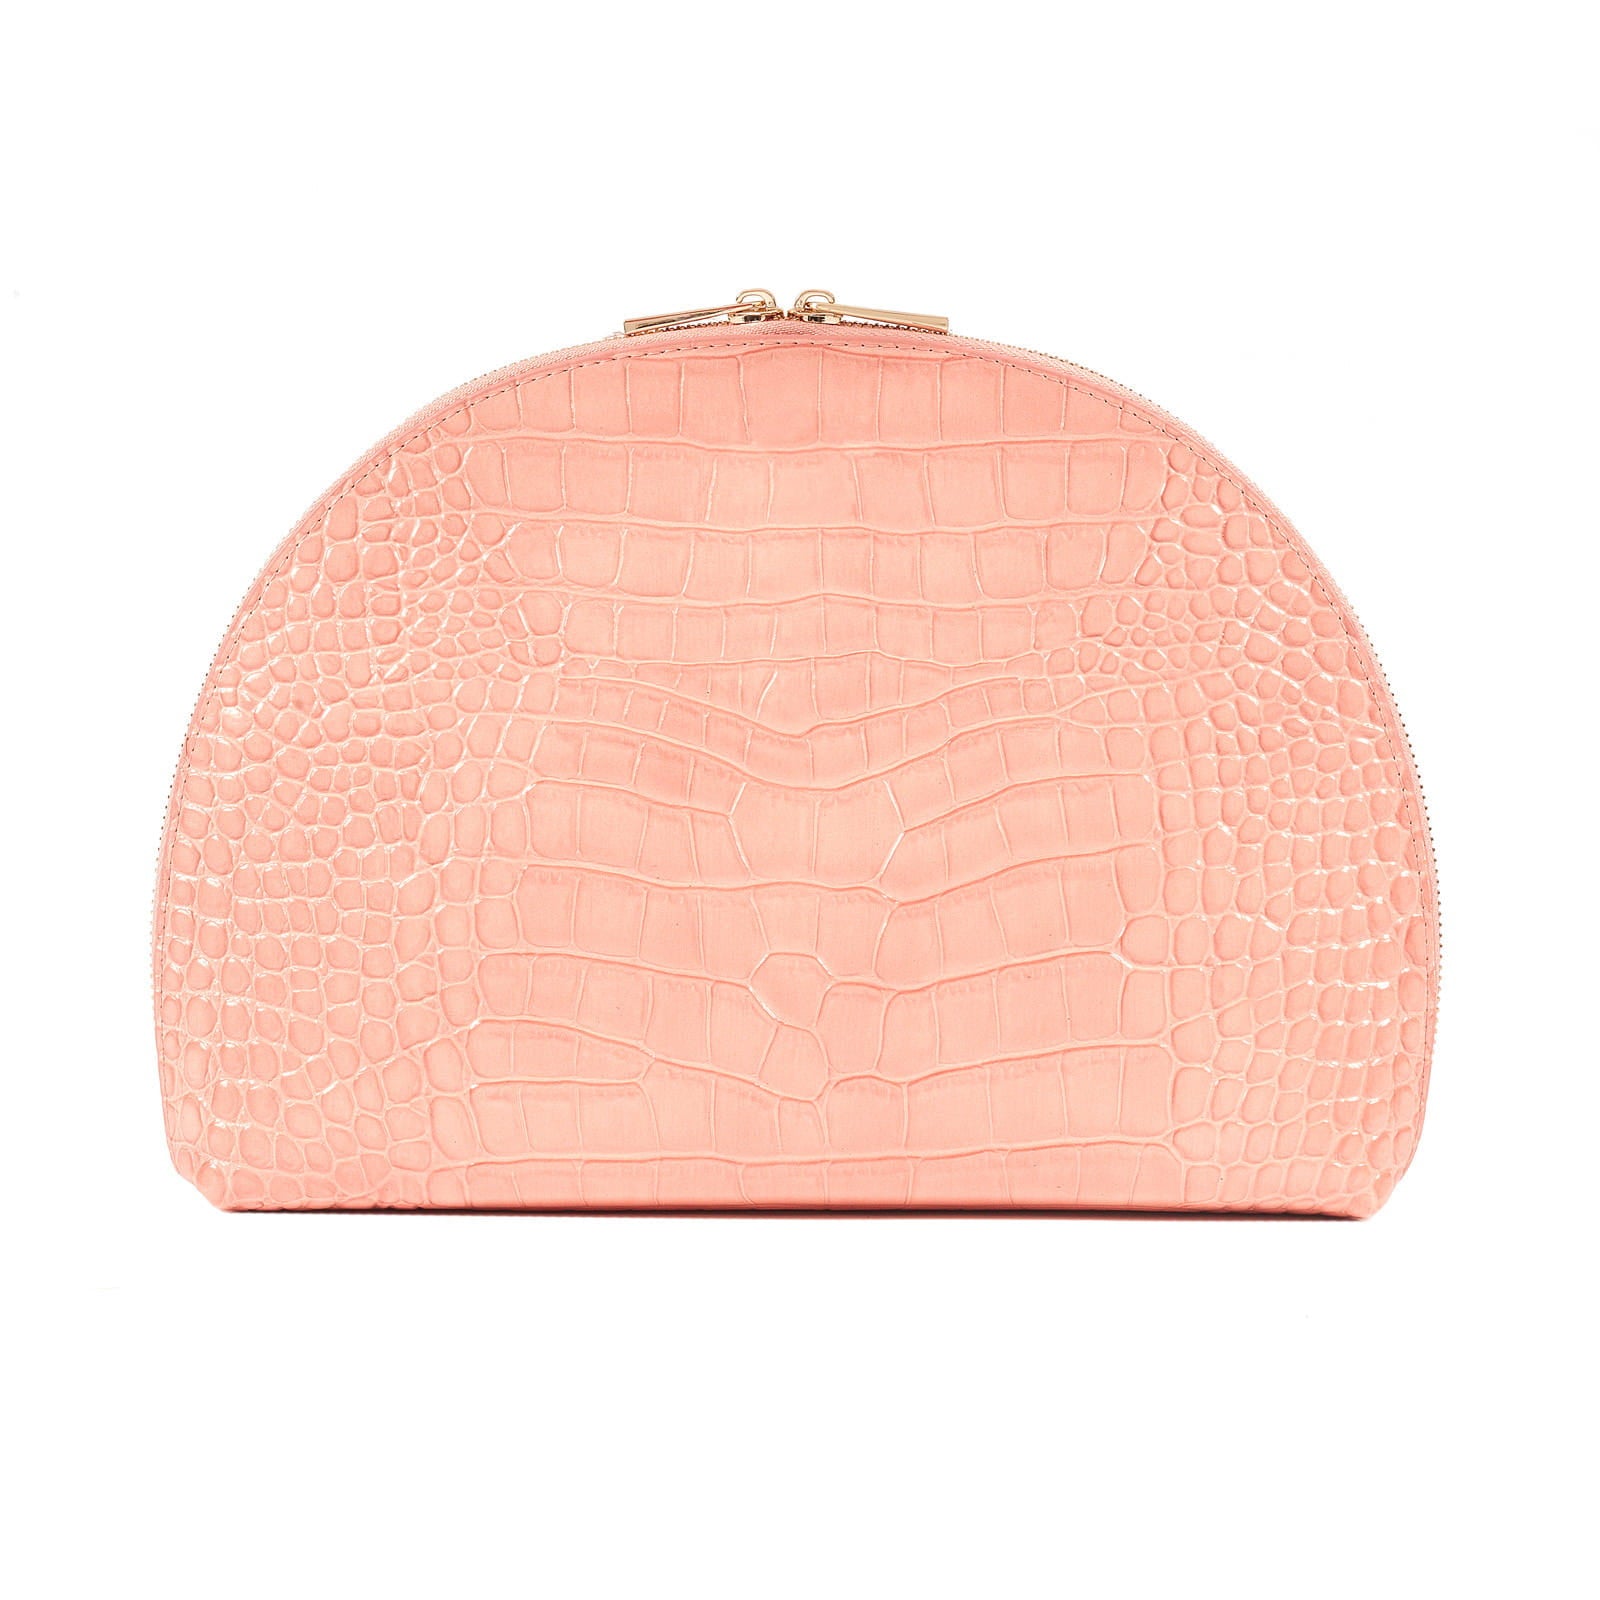 Blank Personalised Pink Croc Leather Half Moon Clutch